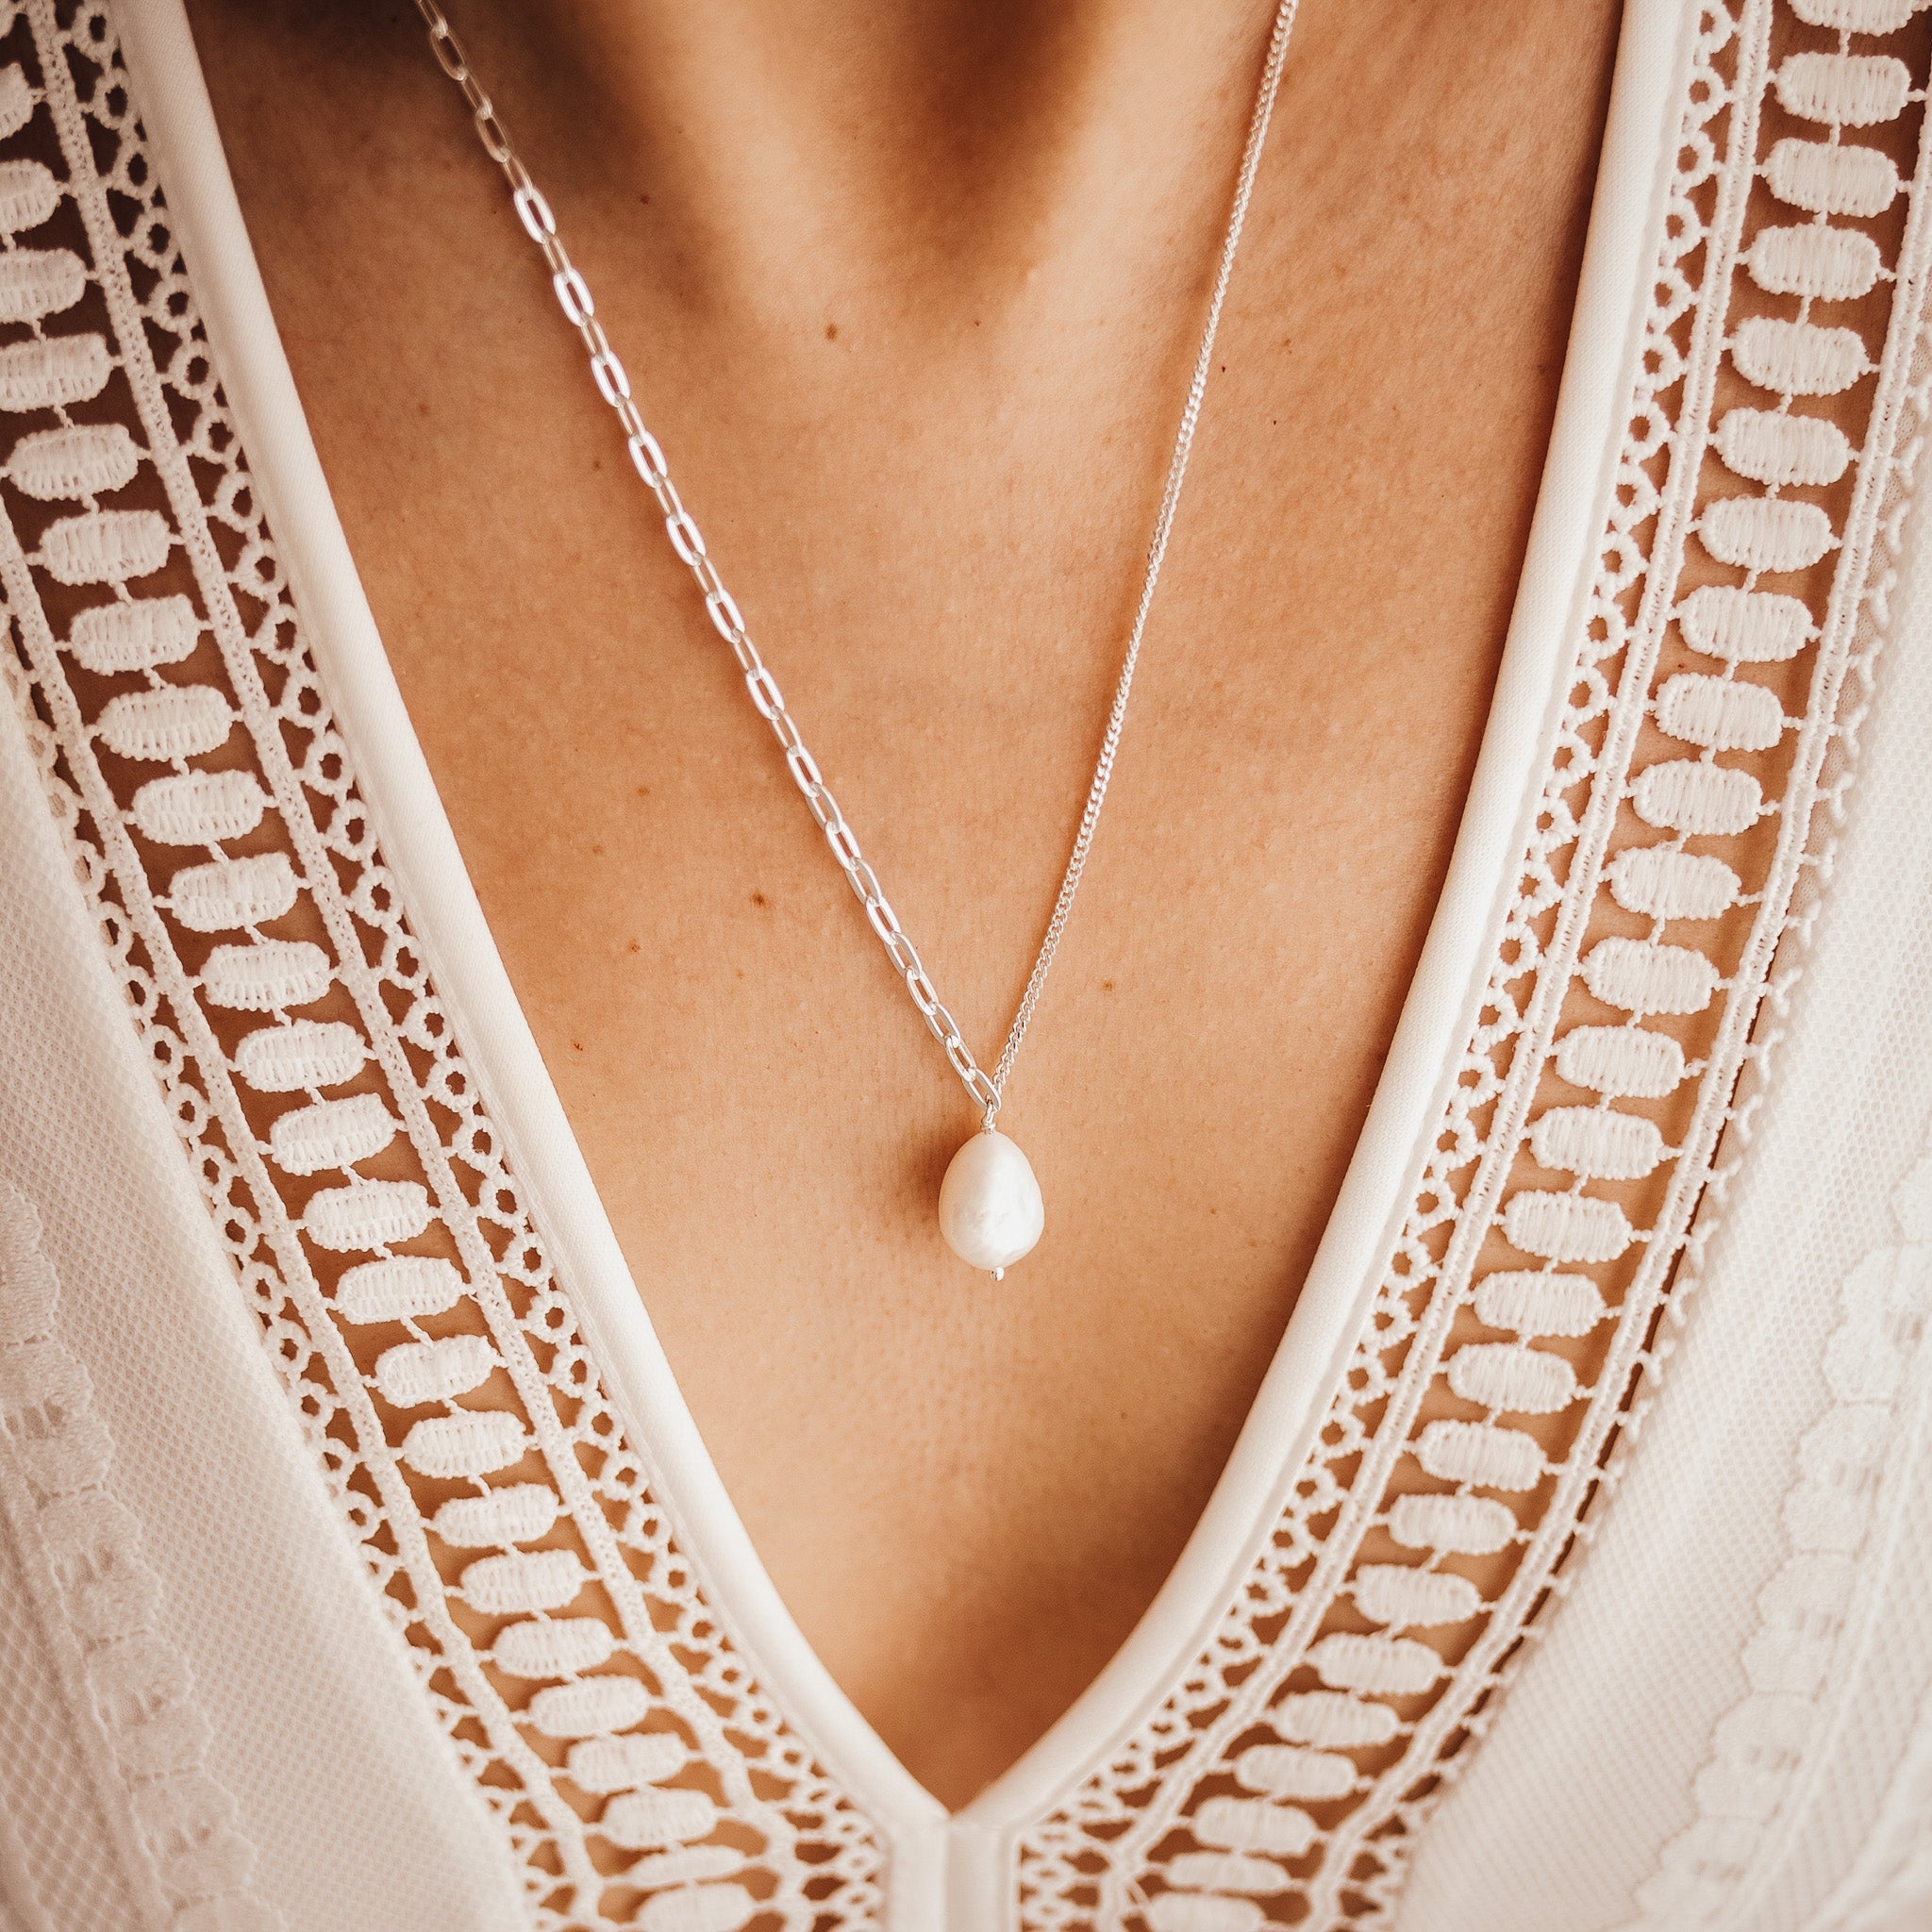 An essential guide to pearl care - Dainty London